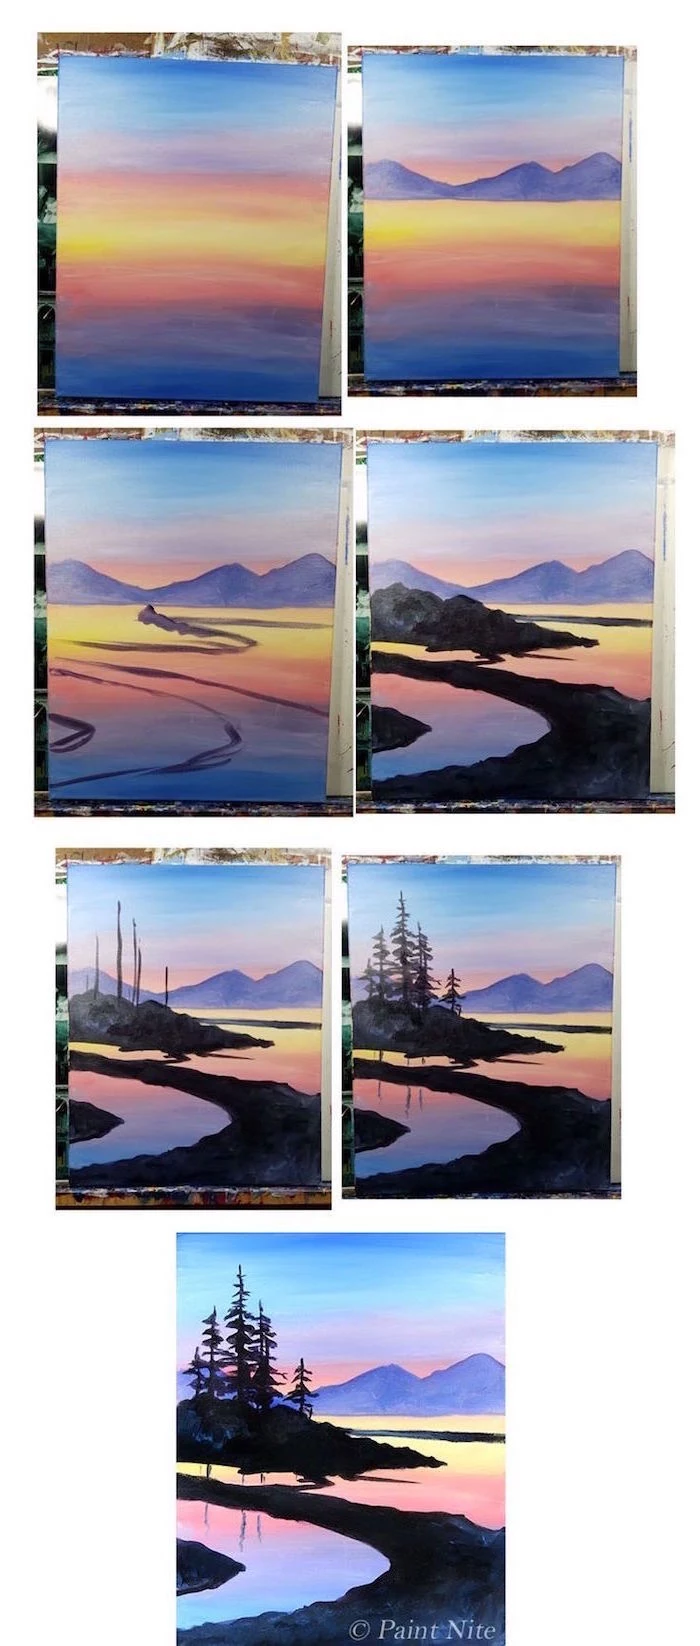 lake landscape, mountains in the background, simple watercolor ideas, painted at sunset